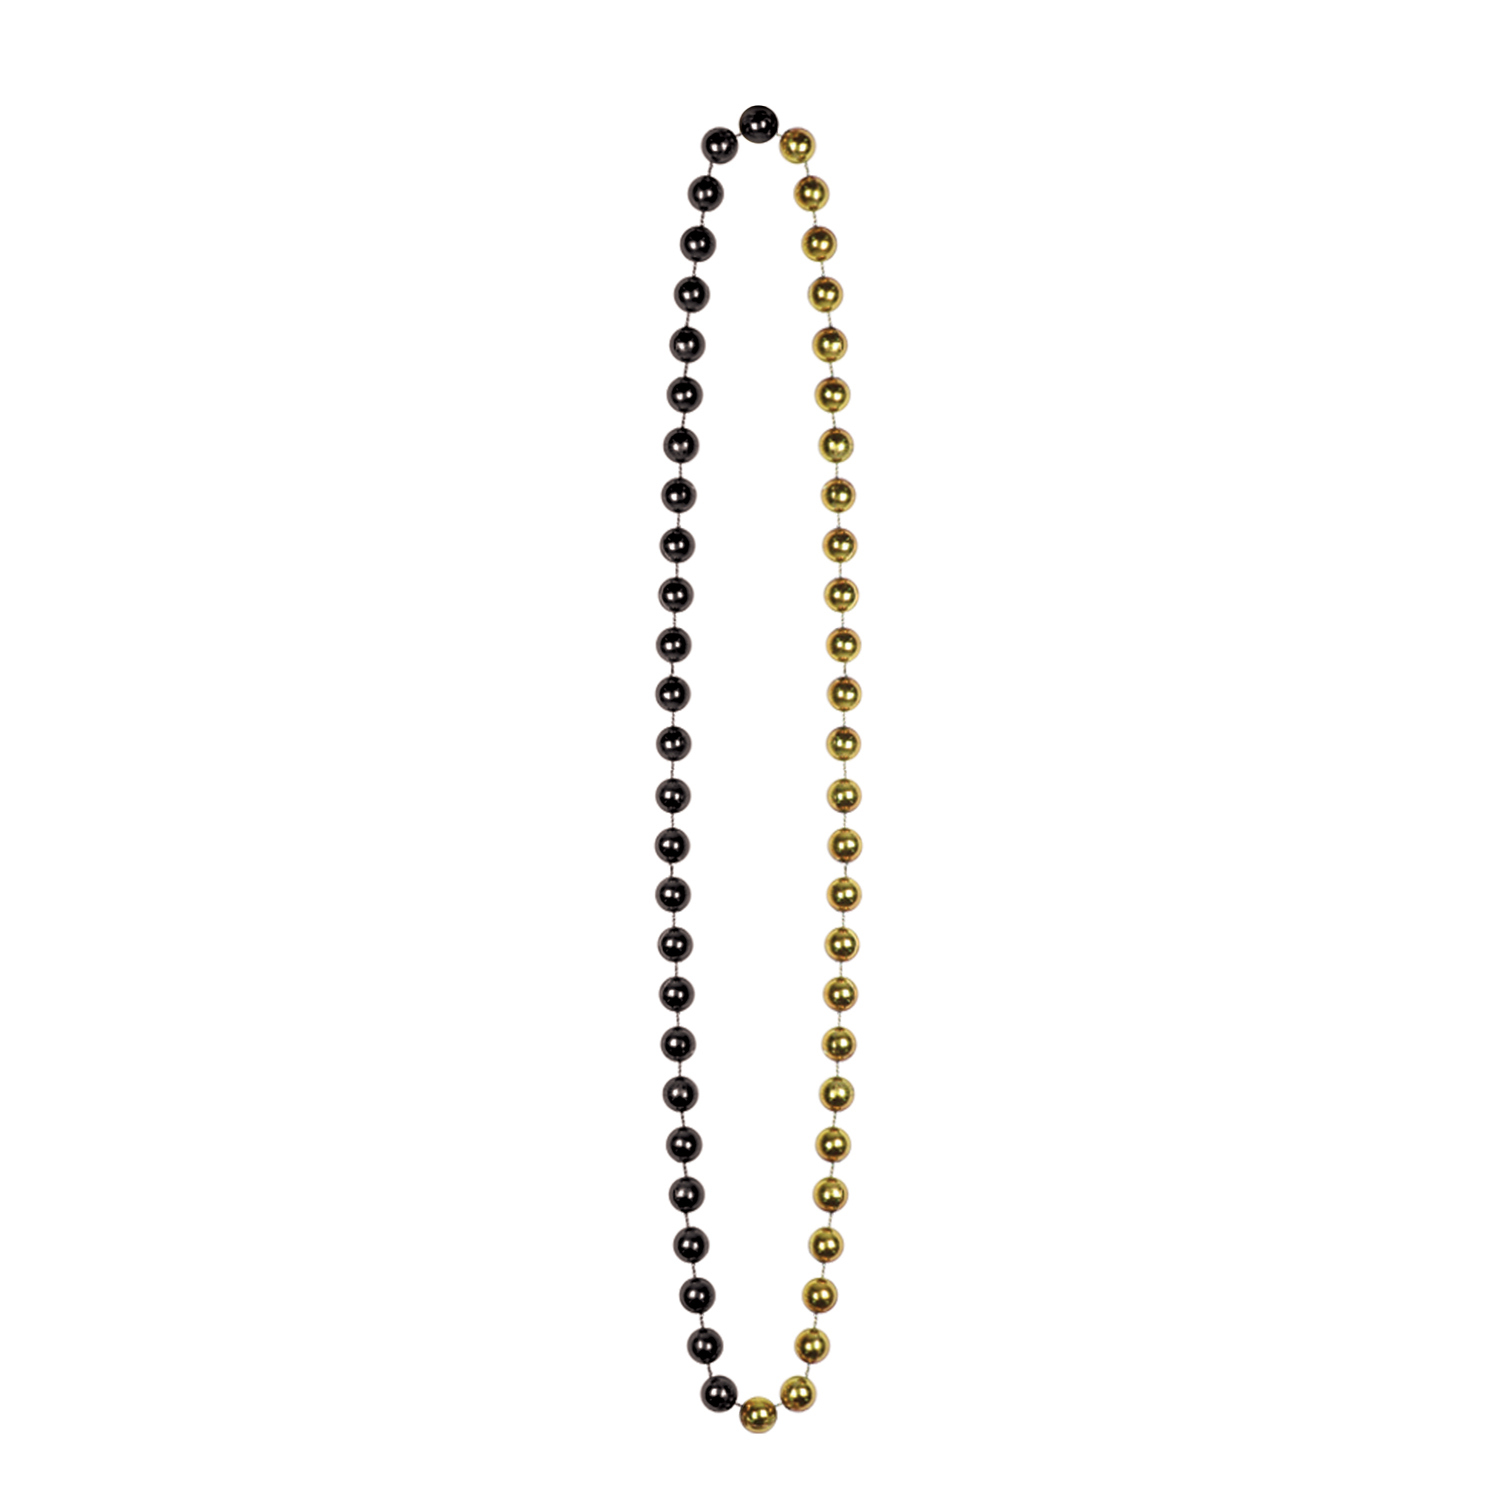 Plastic jumbo sized beads in black and gold.